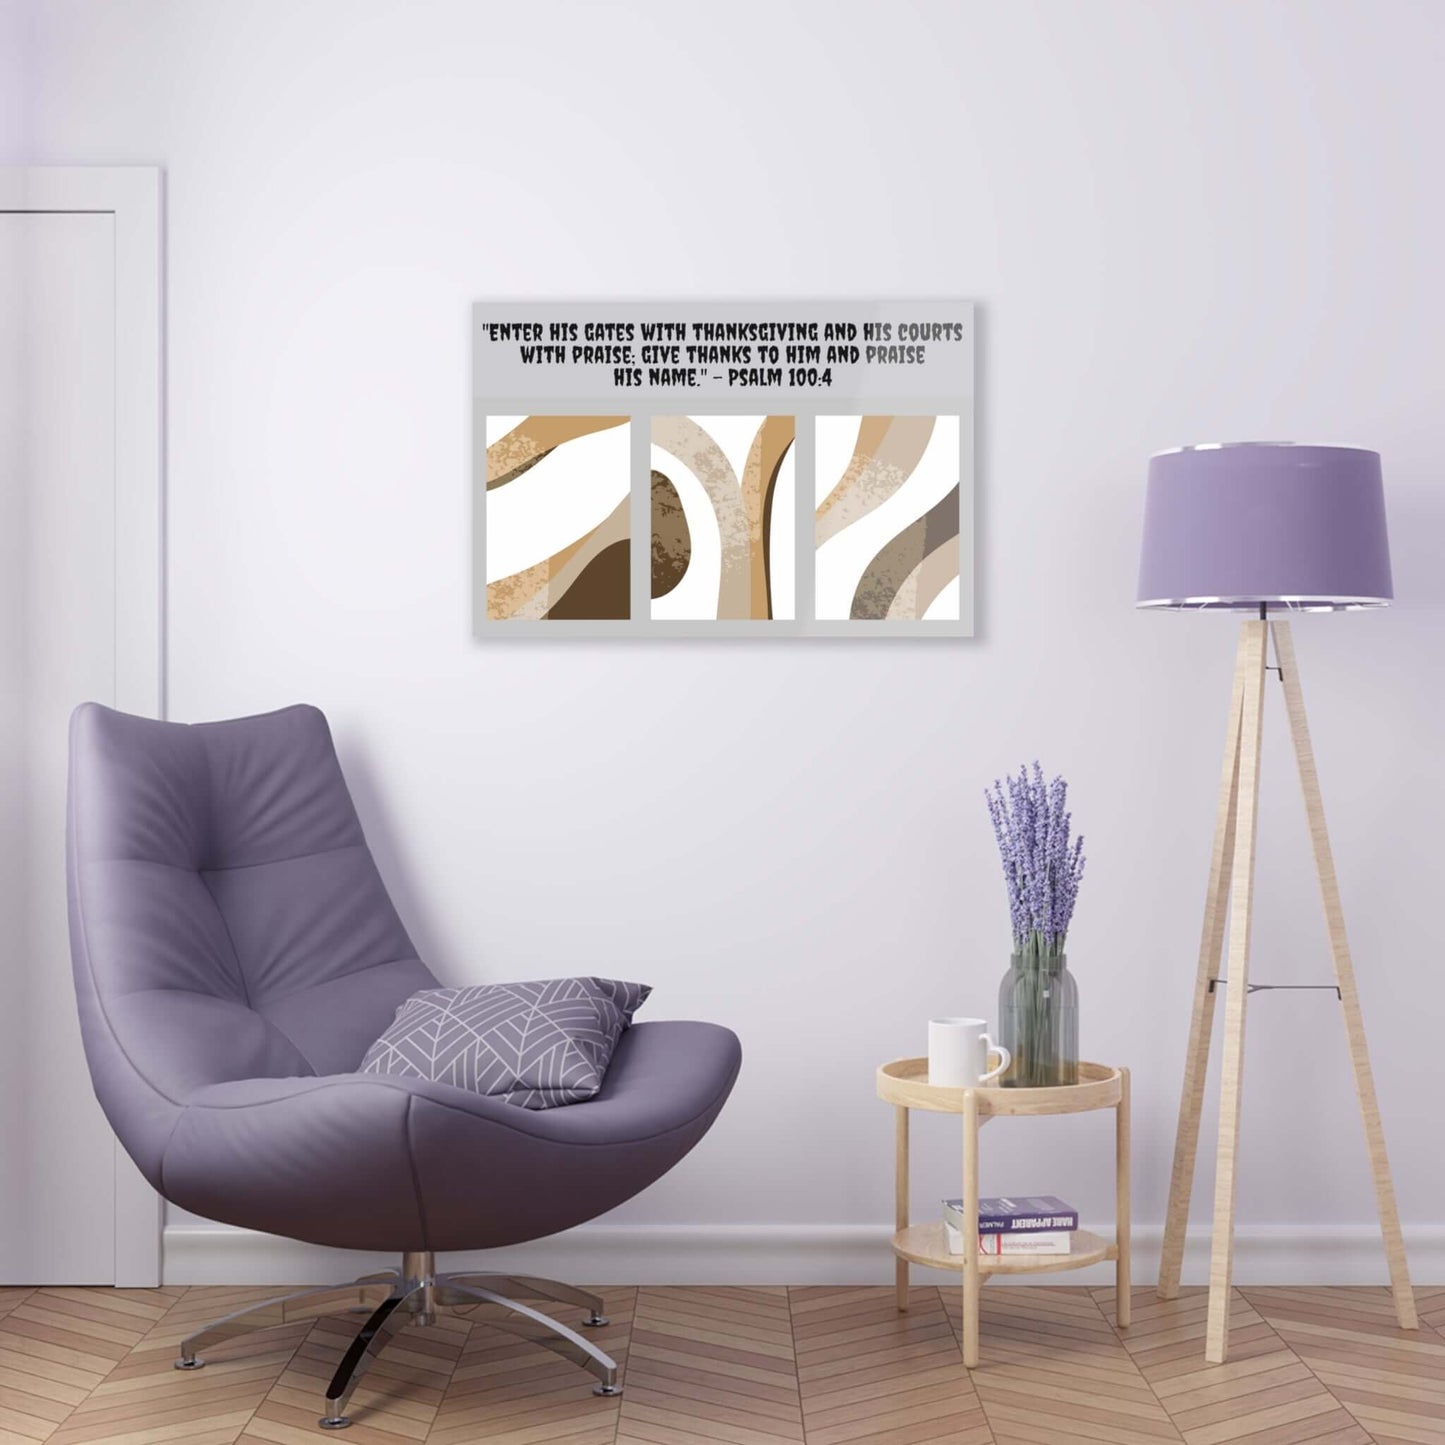 Neutral Wall Art - Acrylic Print with Psalm 100:4 | Art & Wall Decor,Assembled in the USA,Assembled in USA,Decor,Home & Living,Home Decor,Indoor,Made in the USA,Made in USA,Poster